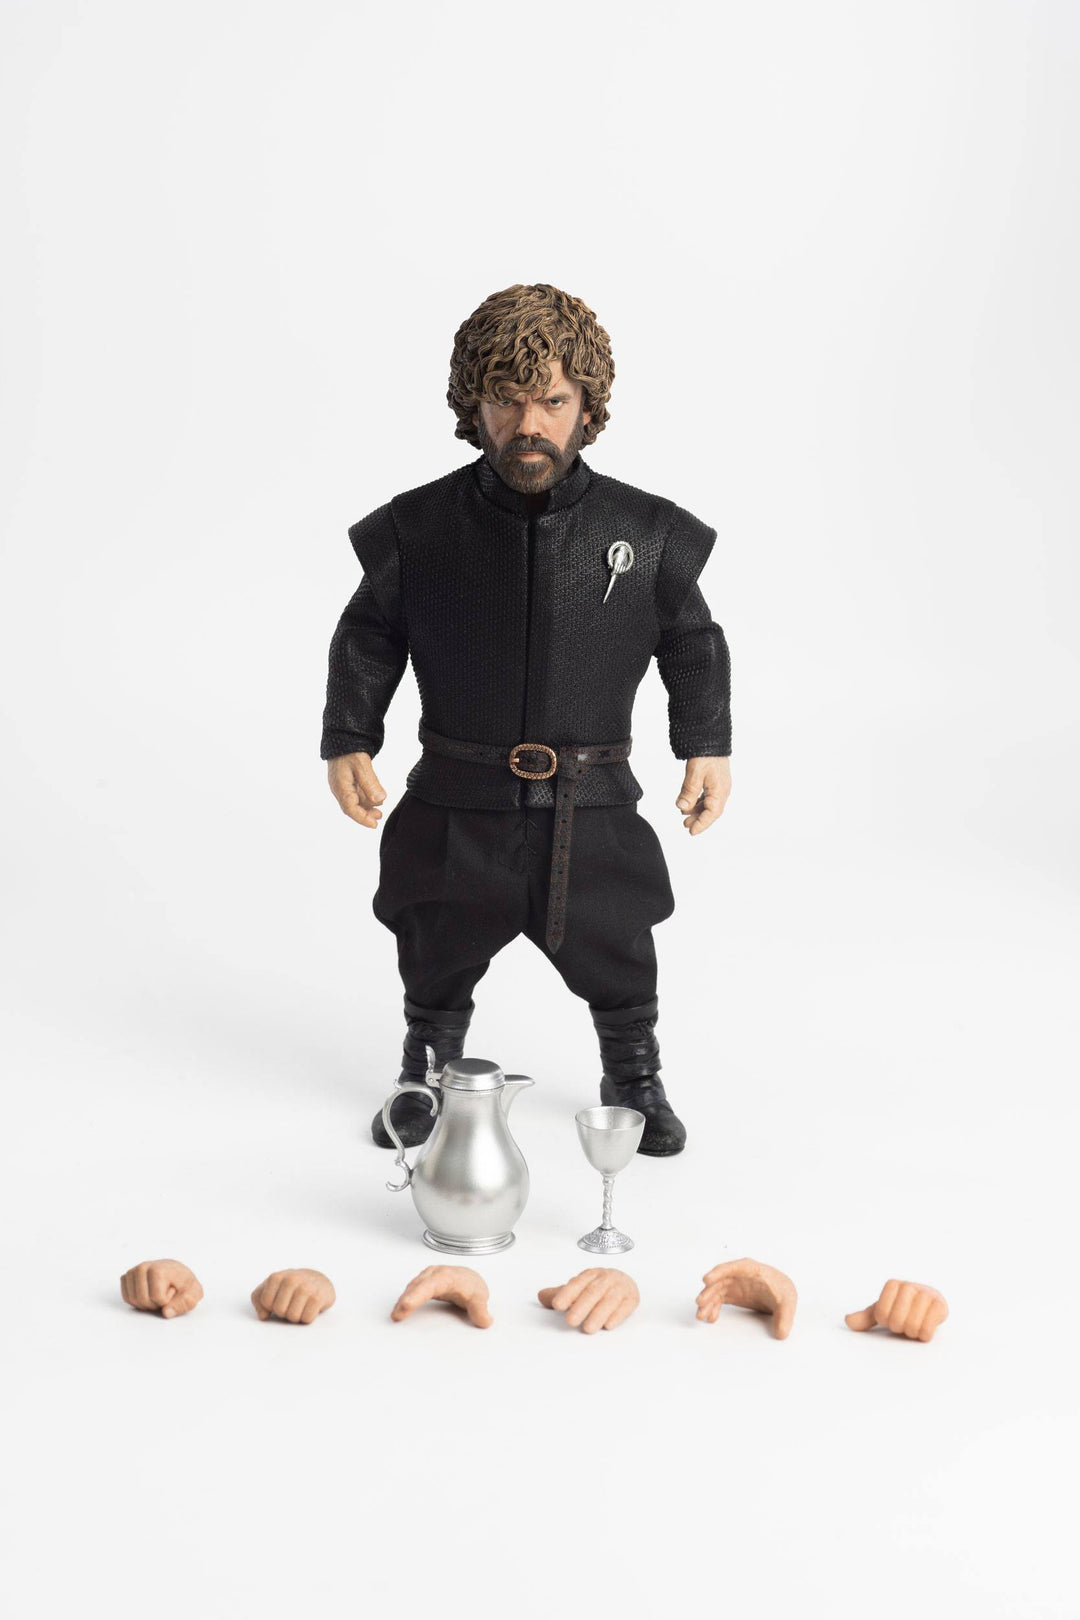 Game of Thrones Tyrion Lannister 1/6 Scale Figure